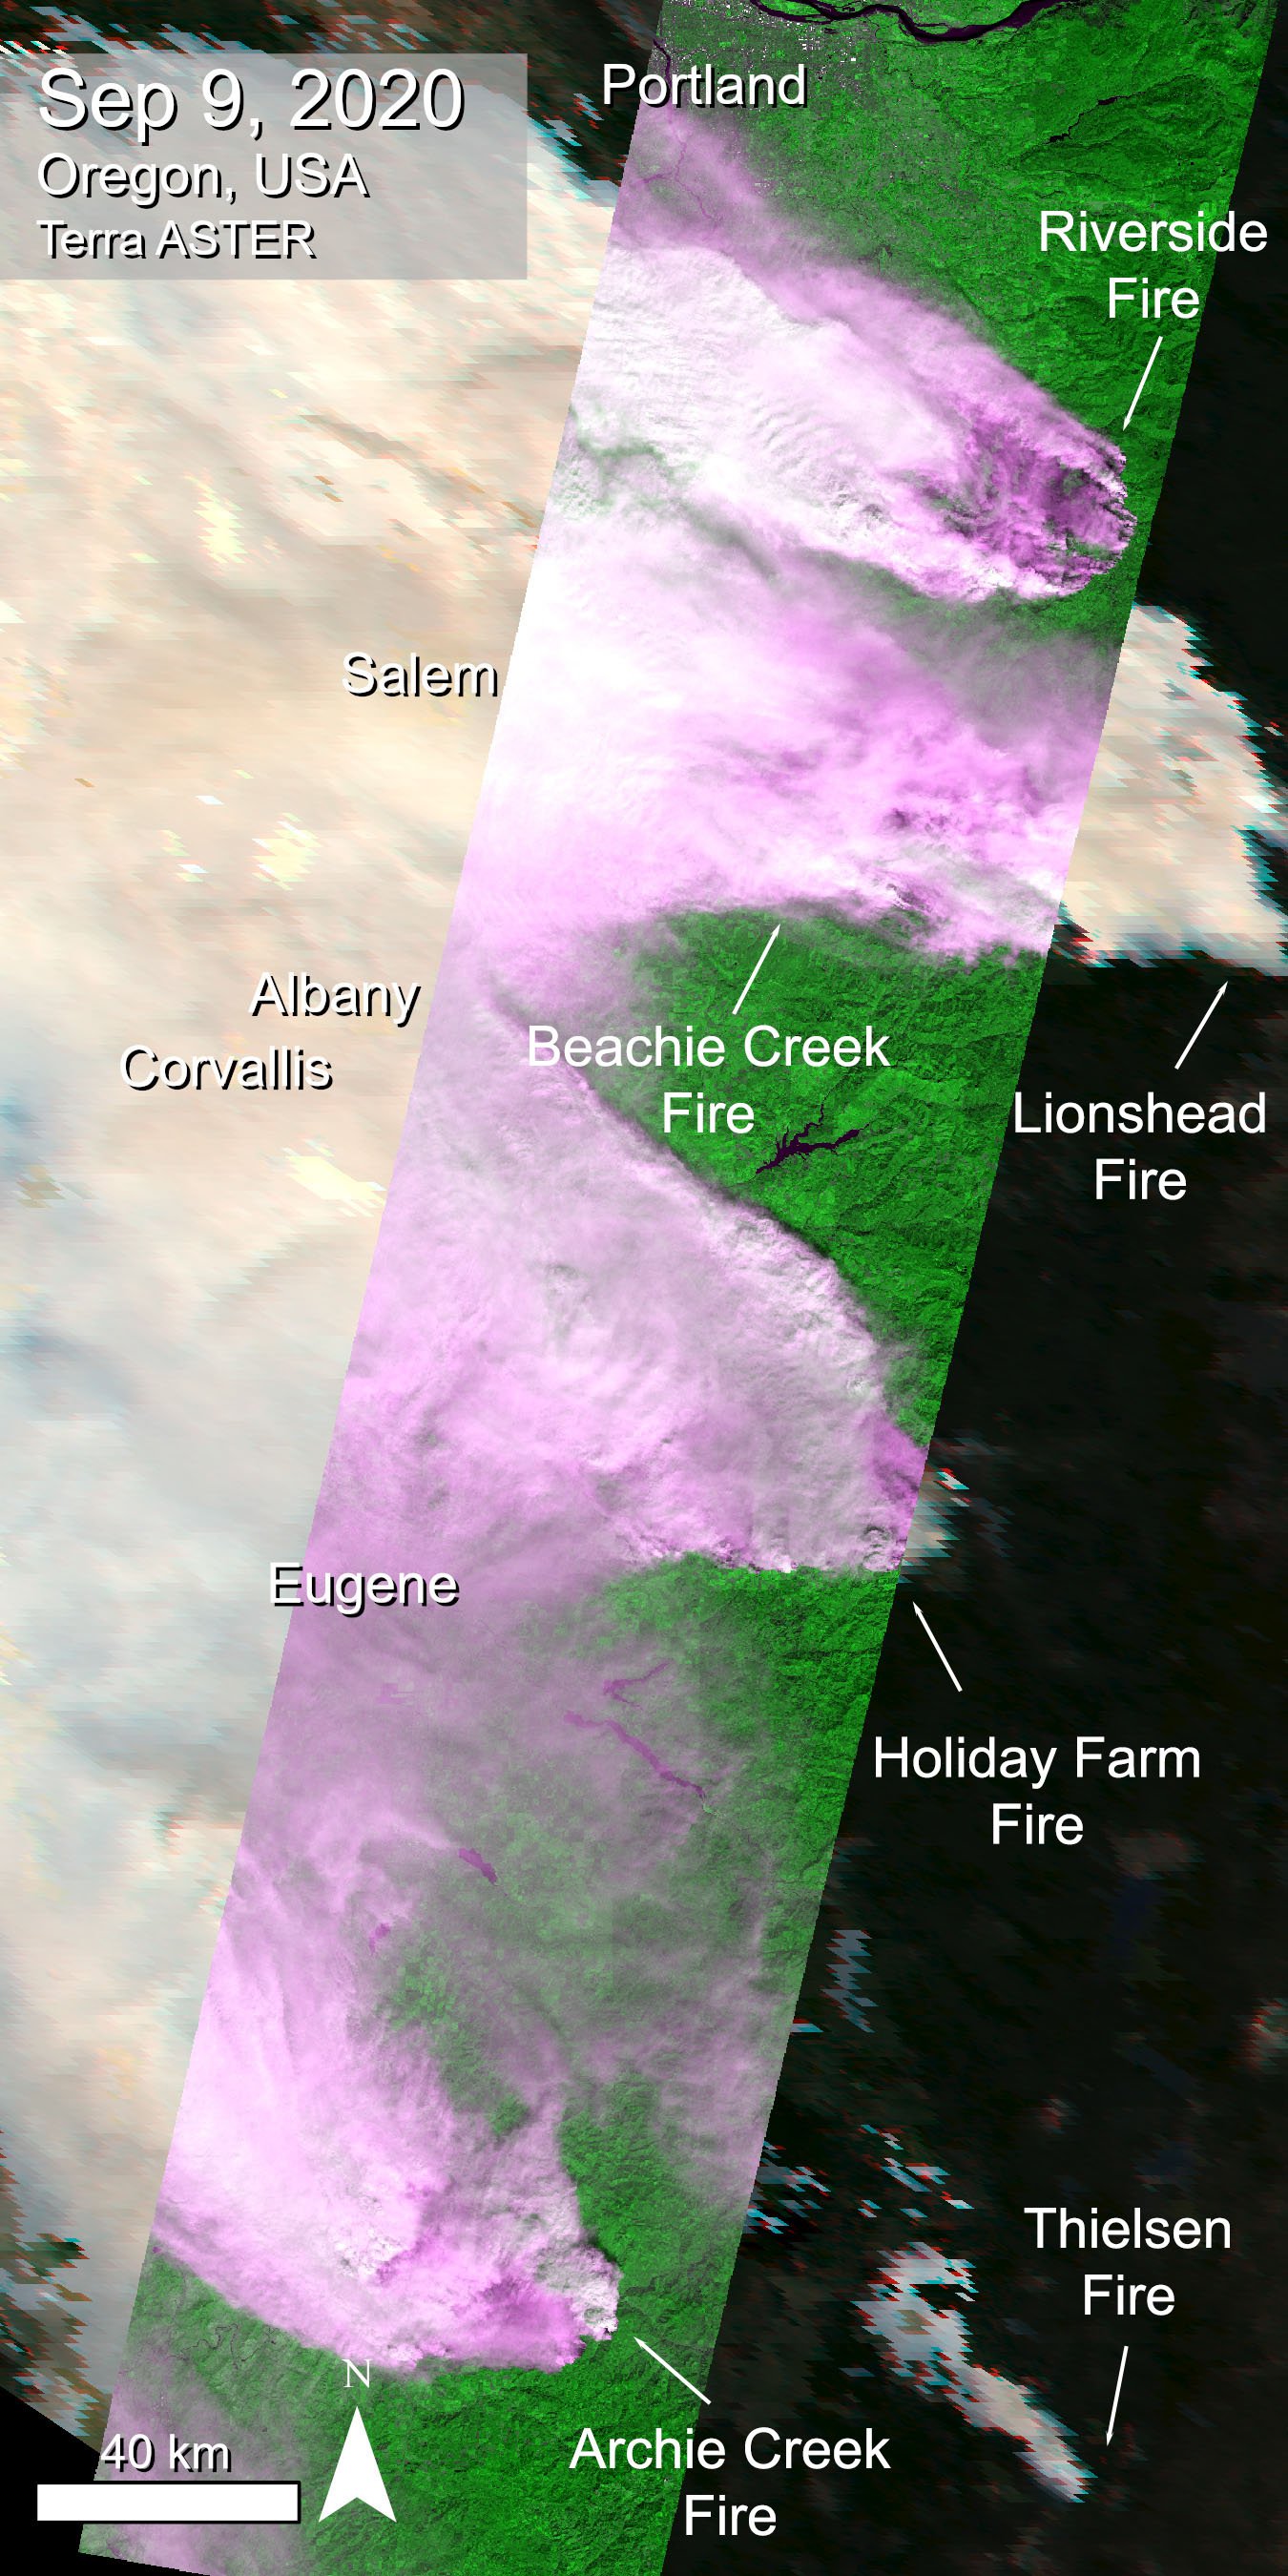 Terra ASTER imagery showing several wildfire.